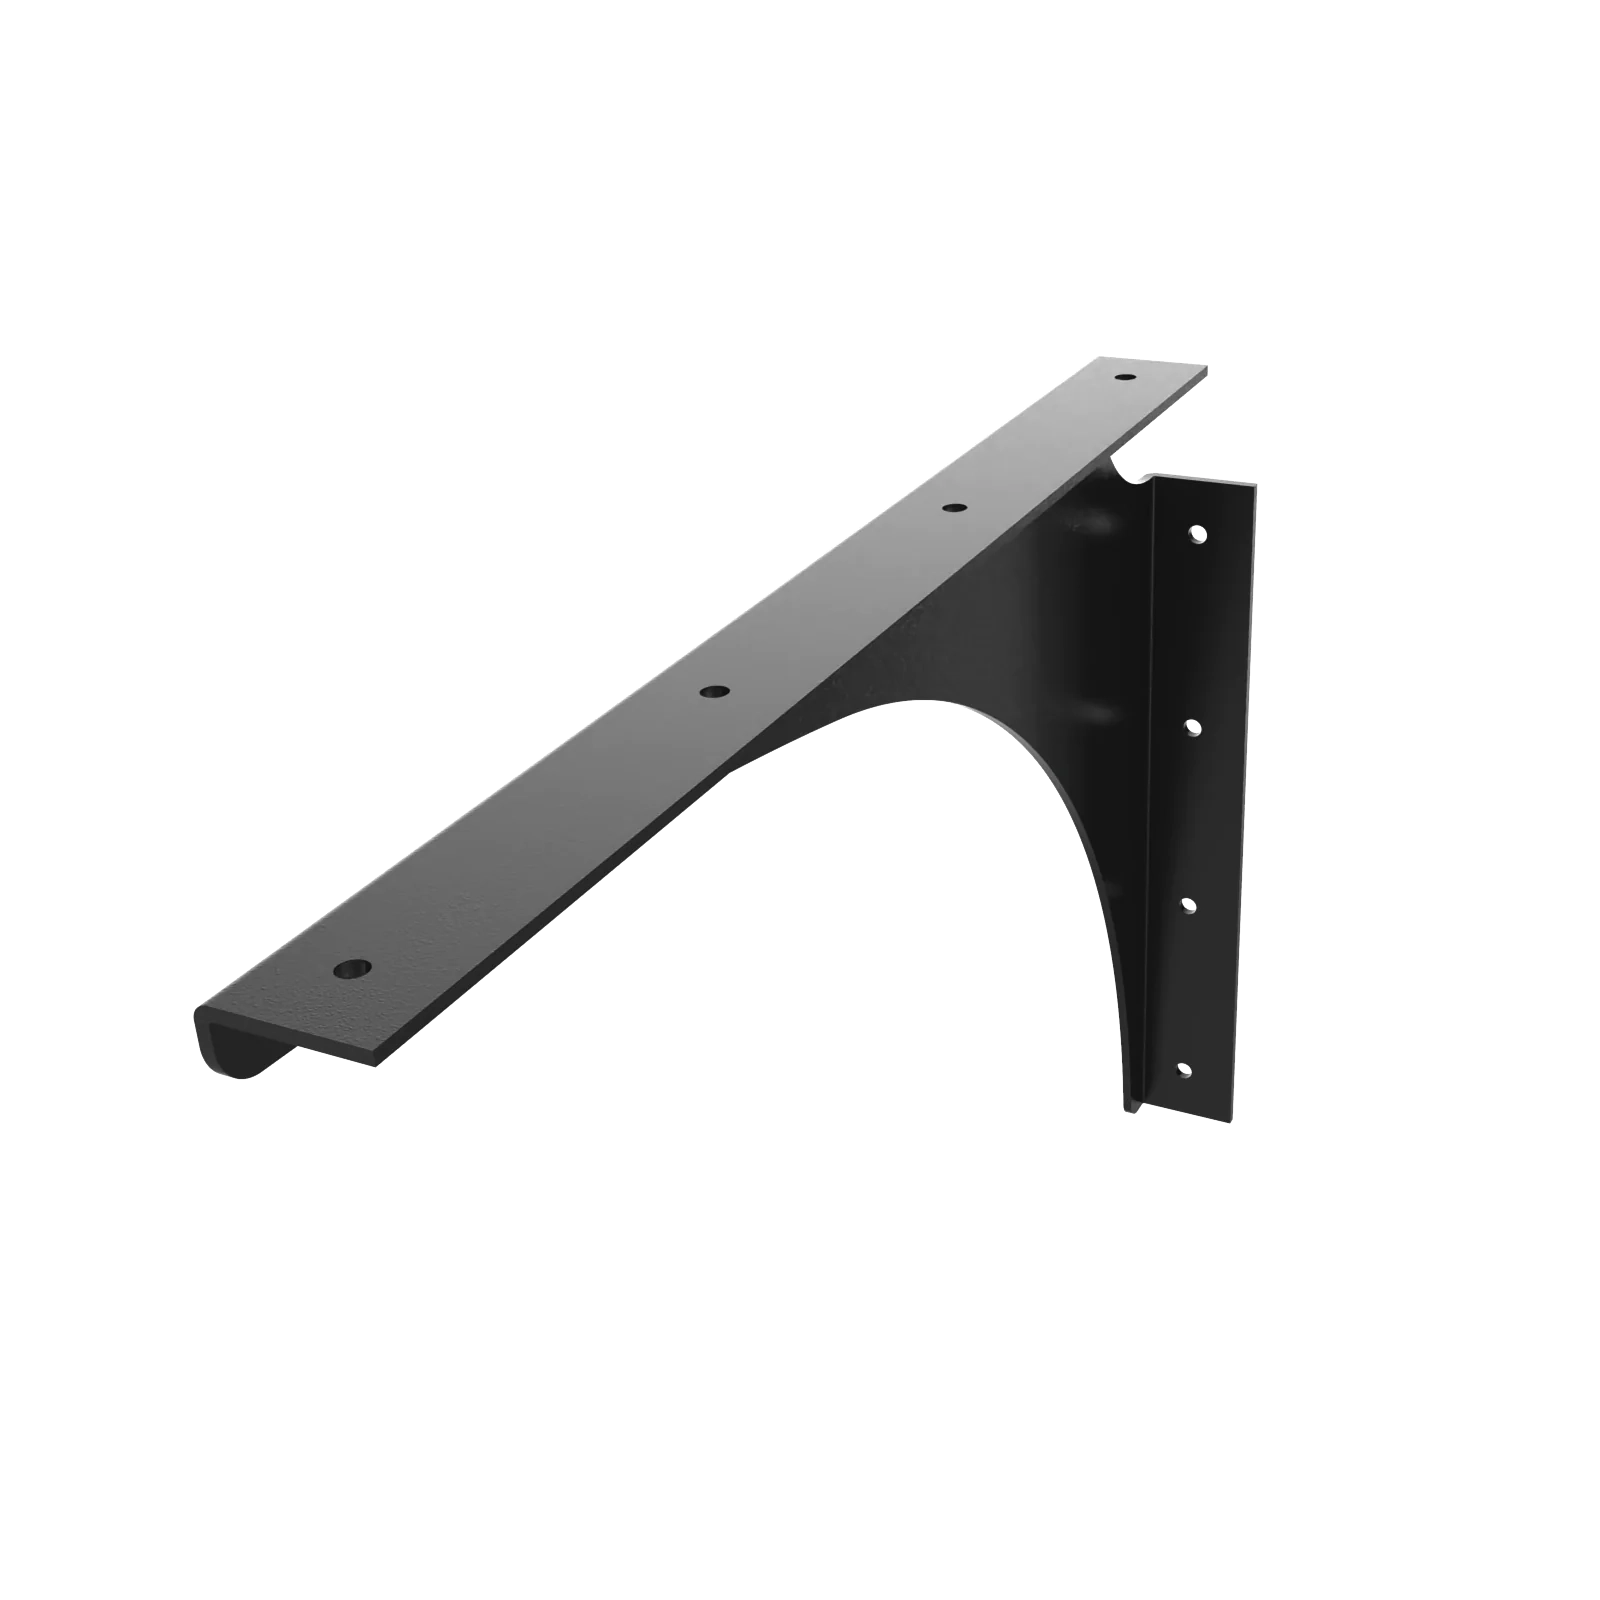 Universal Commercial Support Bracket -  With Black Powder Coat Finish. Supports floating ADA-compliant vanities, desks, shelving, countertops, and more.